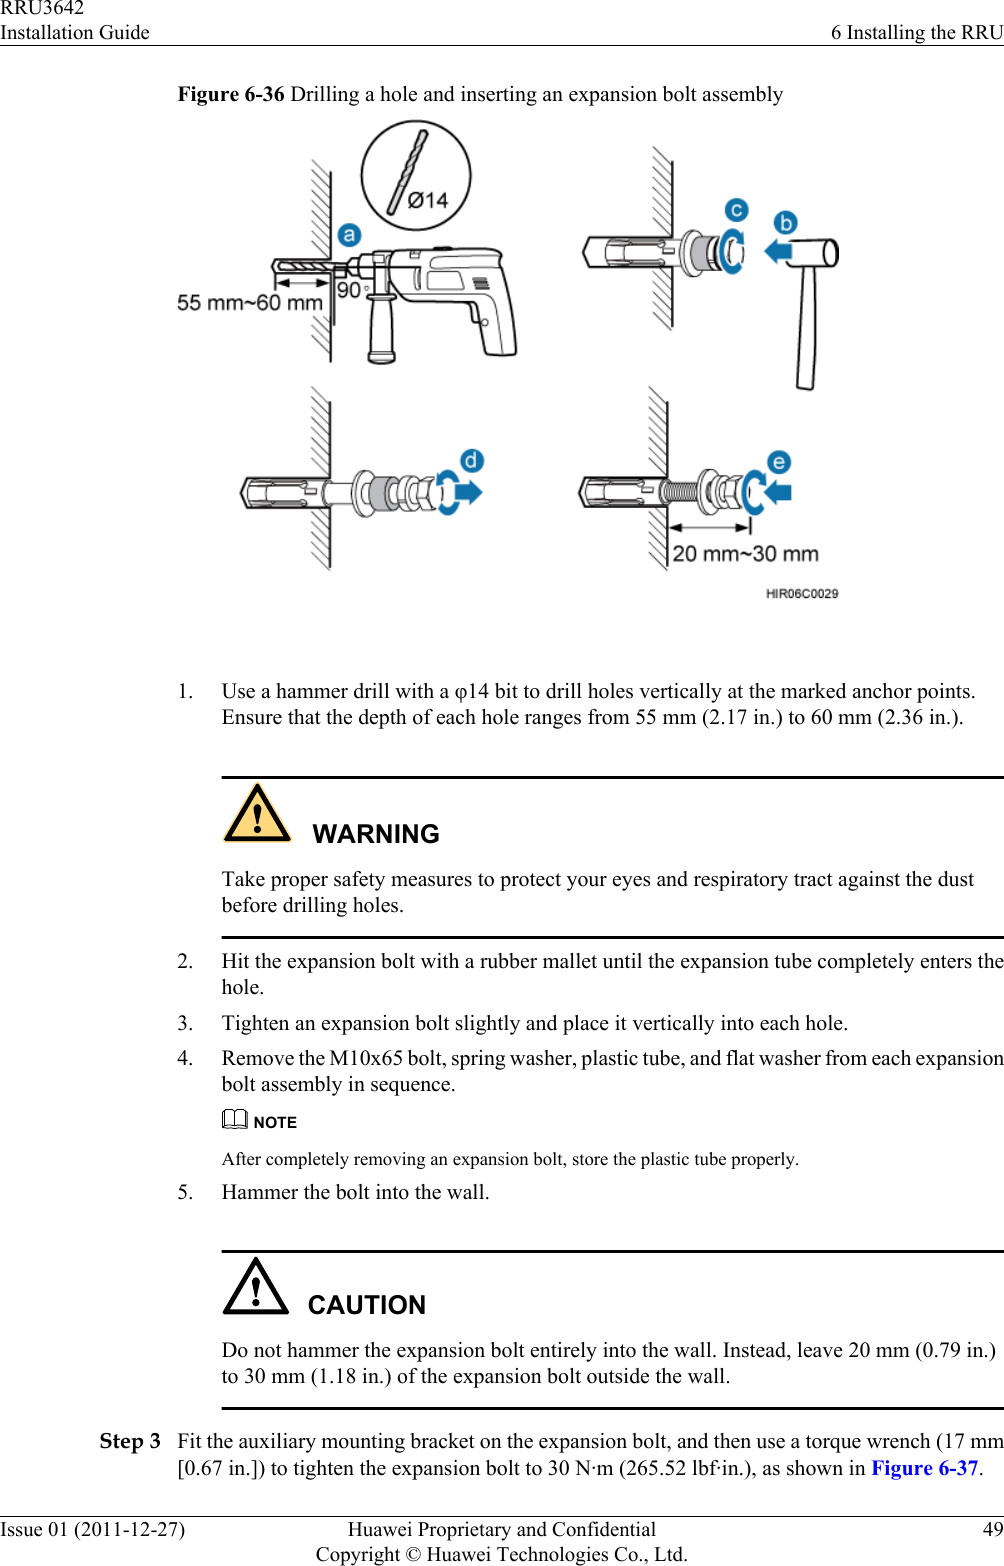 Figure 6-36 Drilling a hole and inserting an expansion bolt assembly 1. Use a hammer drill with a φ14 bit to drill holes vertically at the marked anchor points.Ensure that the depth of each hole ranges from 55 mm (2.17 in.) to 60 mm (2.36 in.).WARNINGTake proper safety measures to protect your eyes and respiratory tract against the dustbefore drilling holes.2. Hit the expansion bolt with a rubber mallet until the expansion tube completely enters thehole.3. Tighten an expansion bolt slightly and place it vertically into each hole.4. Remove the M10x65 bolt, spring washer, plastic tube, and flat washer from each expansionbolt assembly in sequence.NOTEAfter completely removing an expansion bolt, store the plastic tube properly.5. Hammer the bolt into the wall.CAUTIONDo not hammer the expansion bolt entirely into the wall. Instead, leave 20 mm (0.79 in.)to 30 mm (1.18 in.) of the expansion bolt outside the wall.Step 3 Fit the auxiliary mounting bracket on the expansion bolt, and then use a torque wrench (17 mm[0.67 in.]) to tighten the expansion bolt to 30 N·m (265.52 lbf·in.), as shown in Figure 6-37.RRU3642Installation Guide 6 Installing the RRUIssue 01 (2011-12-27) Huawei Proprietary and ConfidentialCopyright © Huawei Technologies Co., Ltd.49